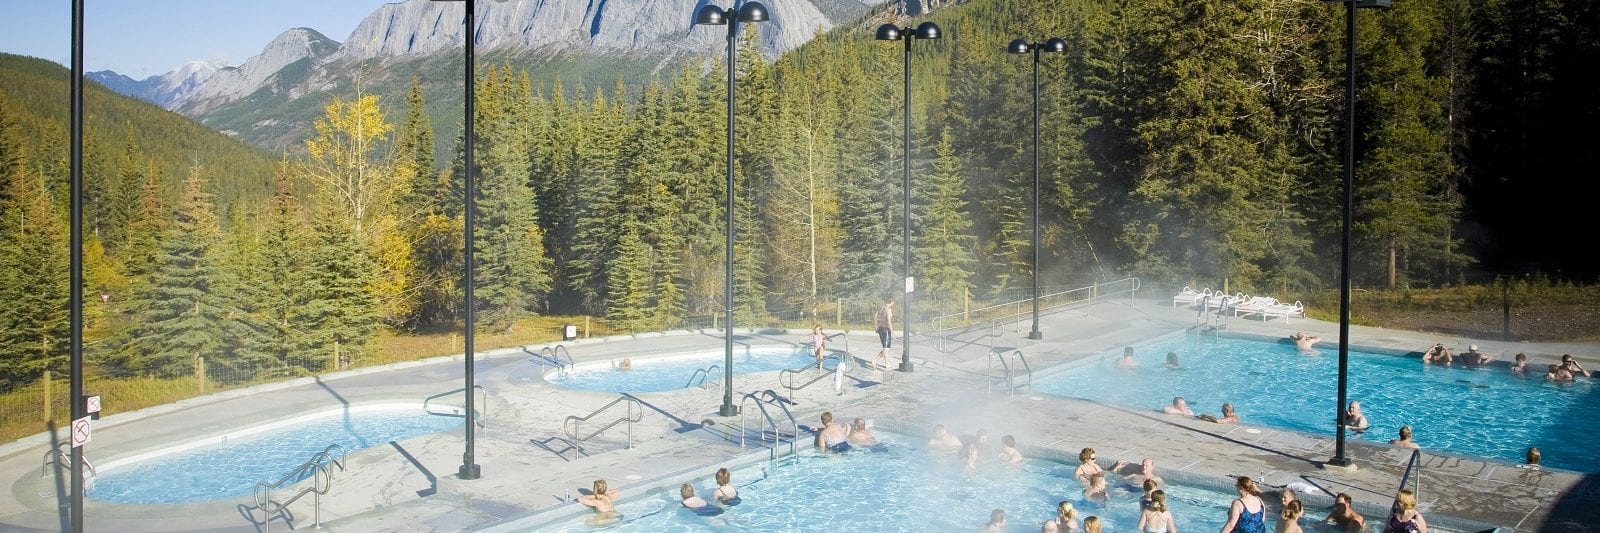 Miette Hot Springs Image